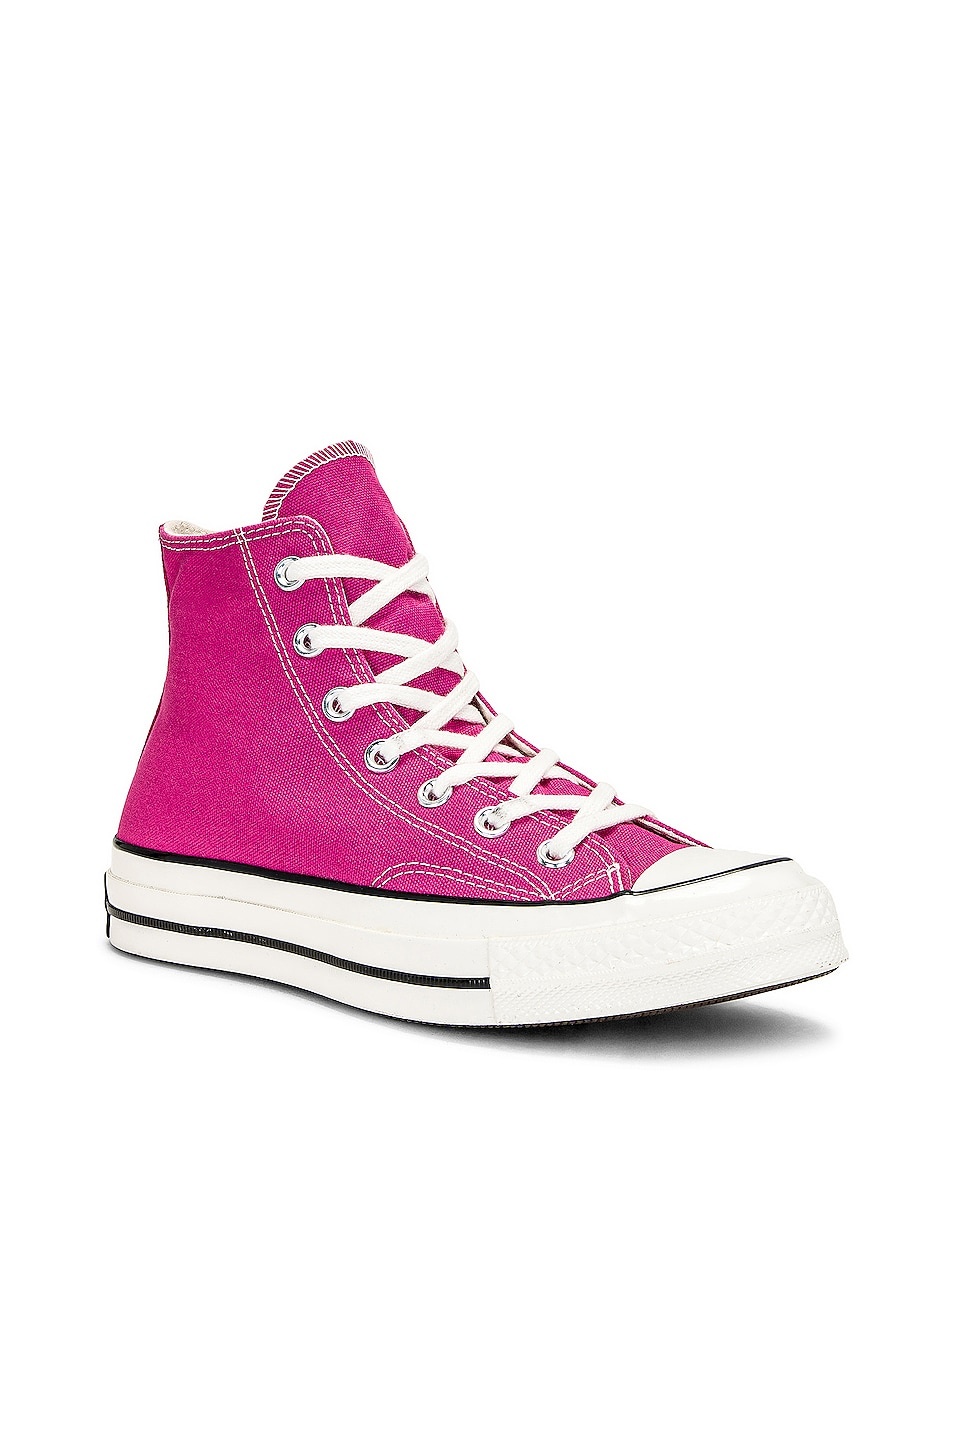 Chuck 70 Fall Tone In Lucky Pink/egret/black - 2